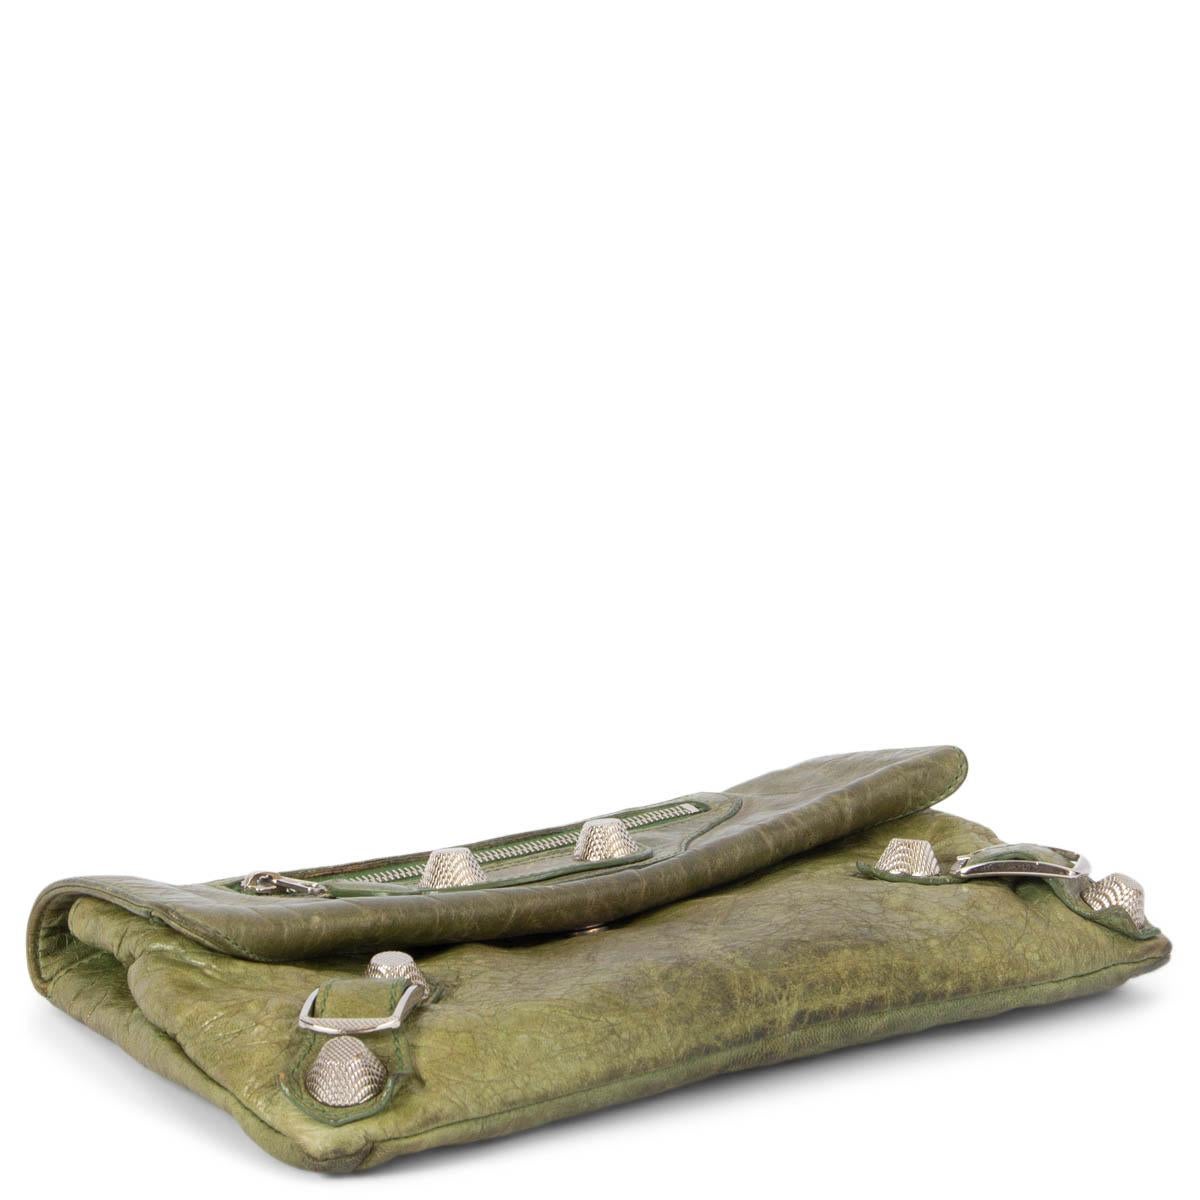 Women's BALENCIAGA Militaire green distressed leather MOTOCROSS GIANT Clutch Bag